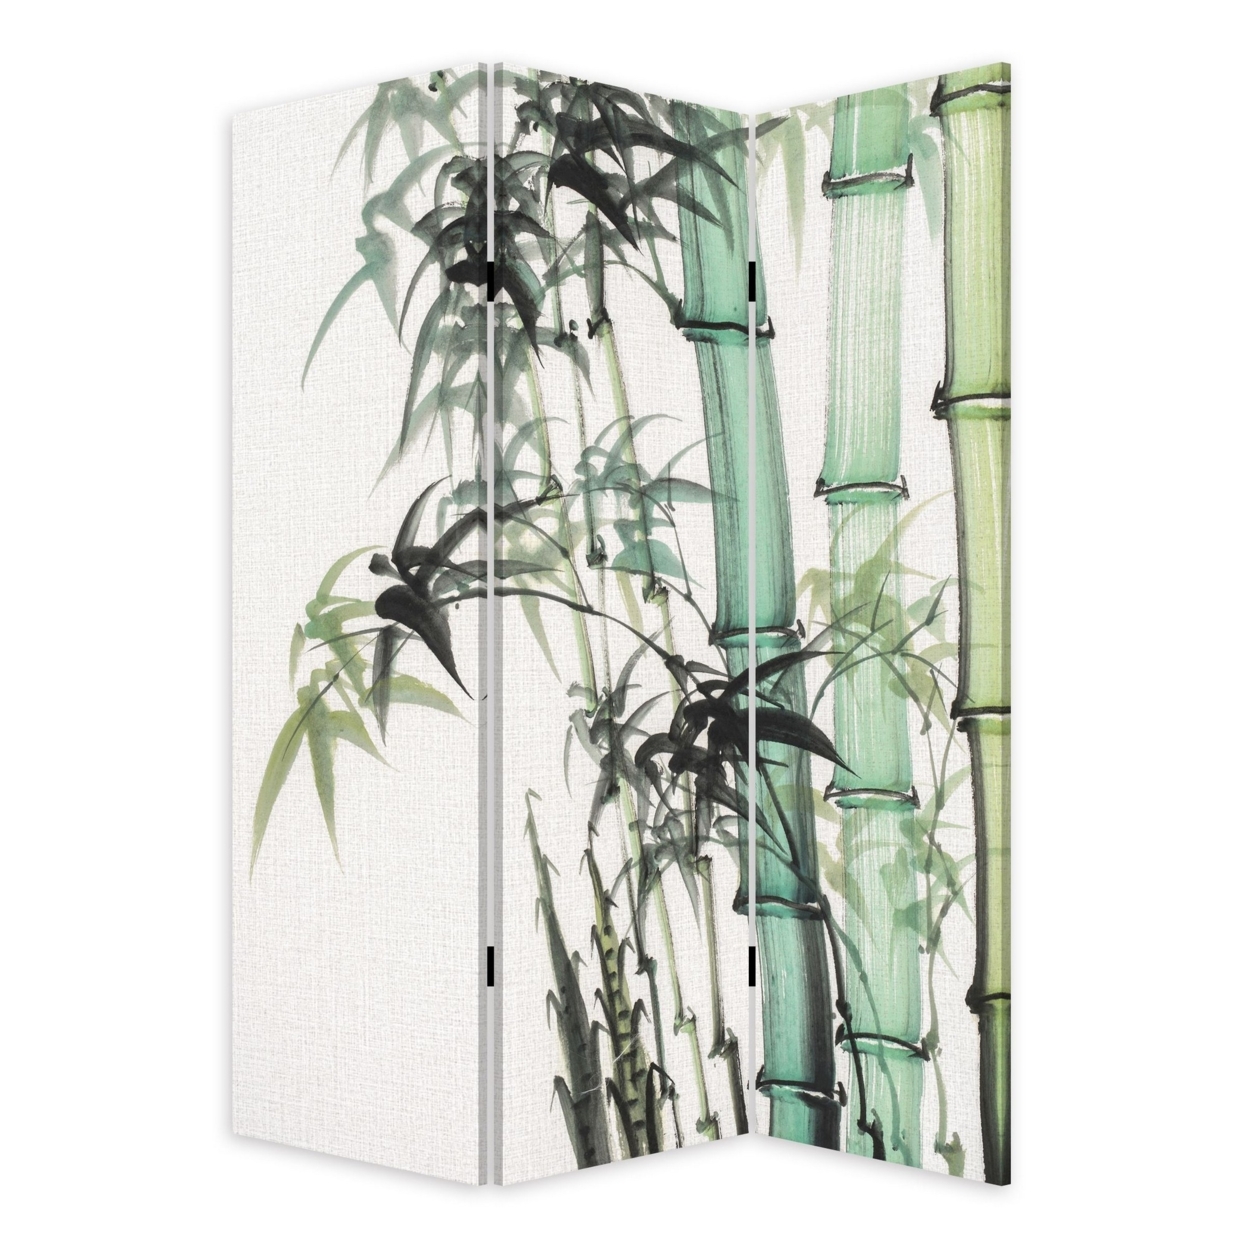 72 Inch 3 Panel Canvas Room Divider With Bamboo Print,Multicolor- Saltoro Sherpi